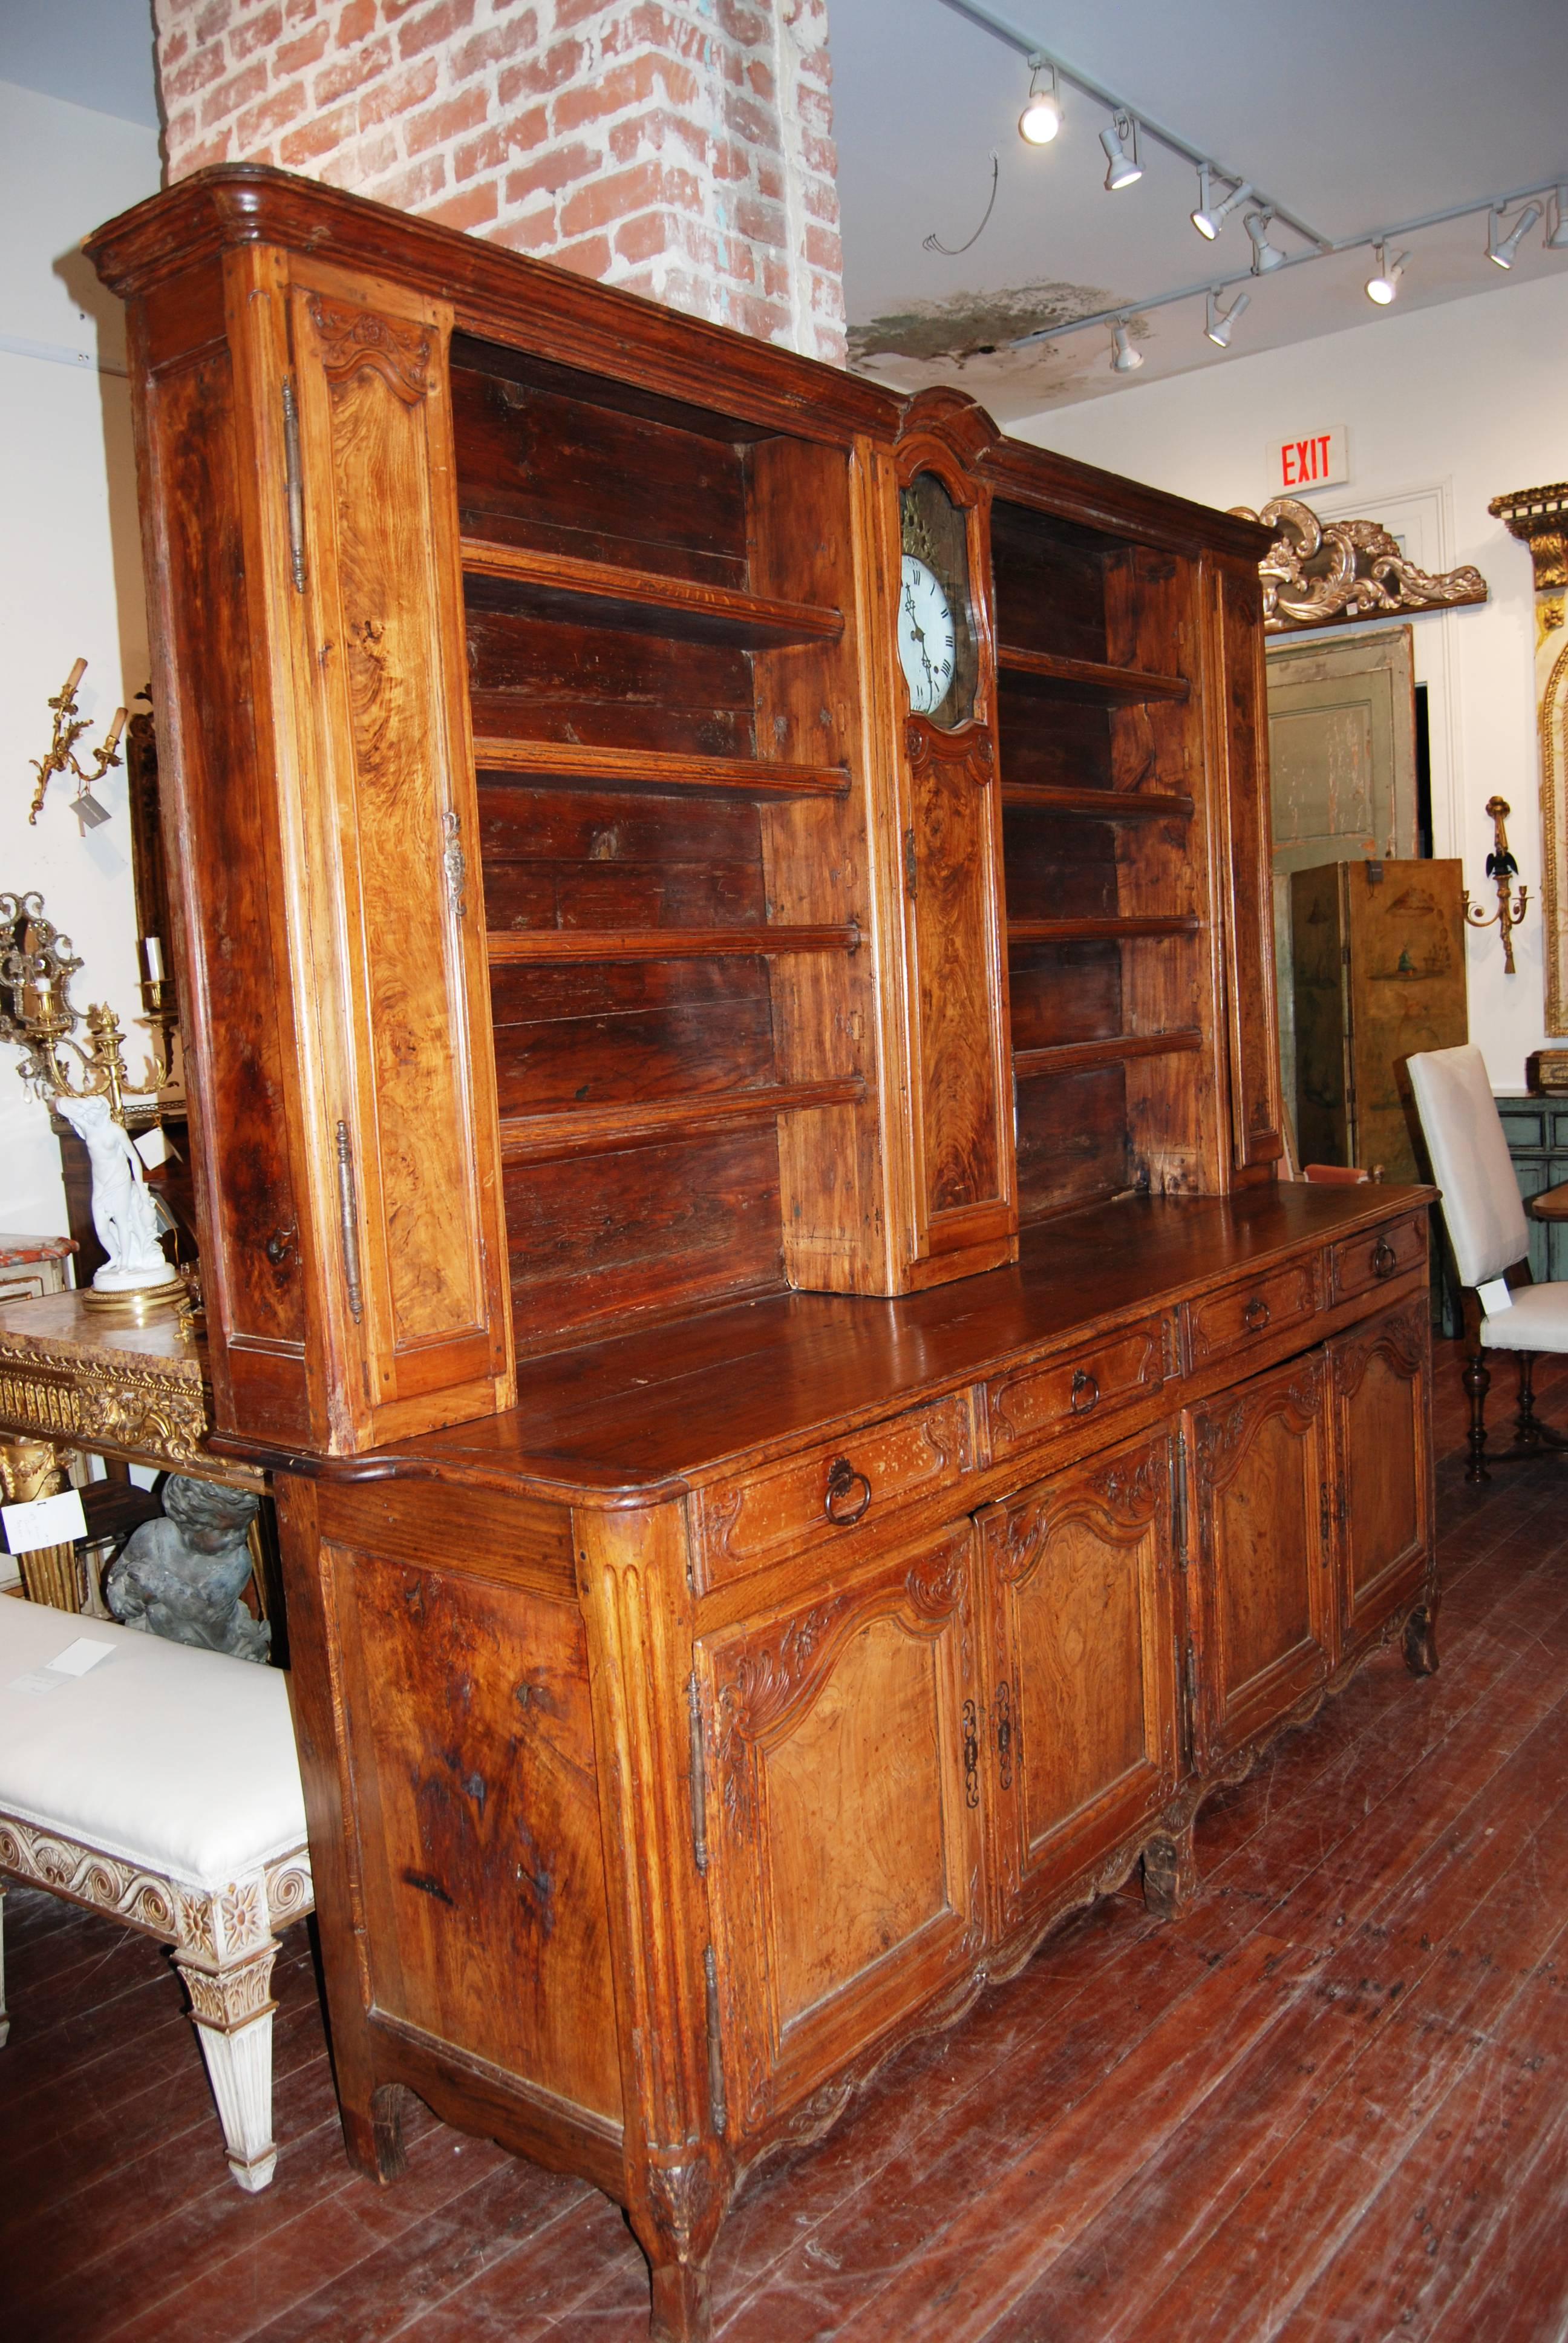 Beautiful Rustic French walnut vaisselier with Mobilier clock. Beautiful display area and storage options.